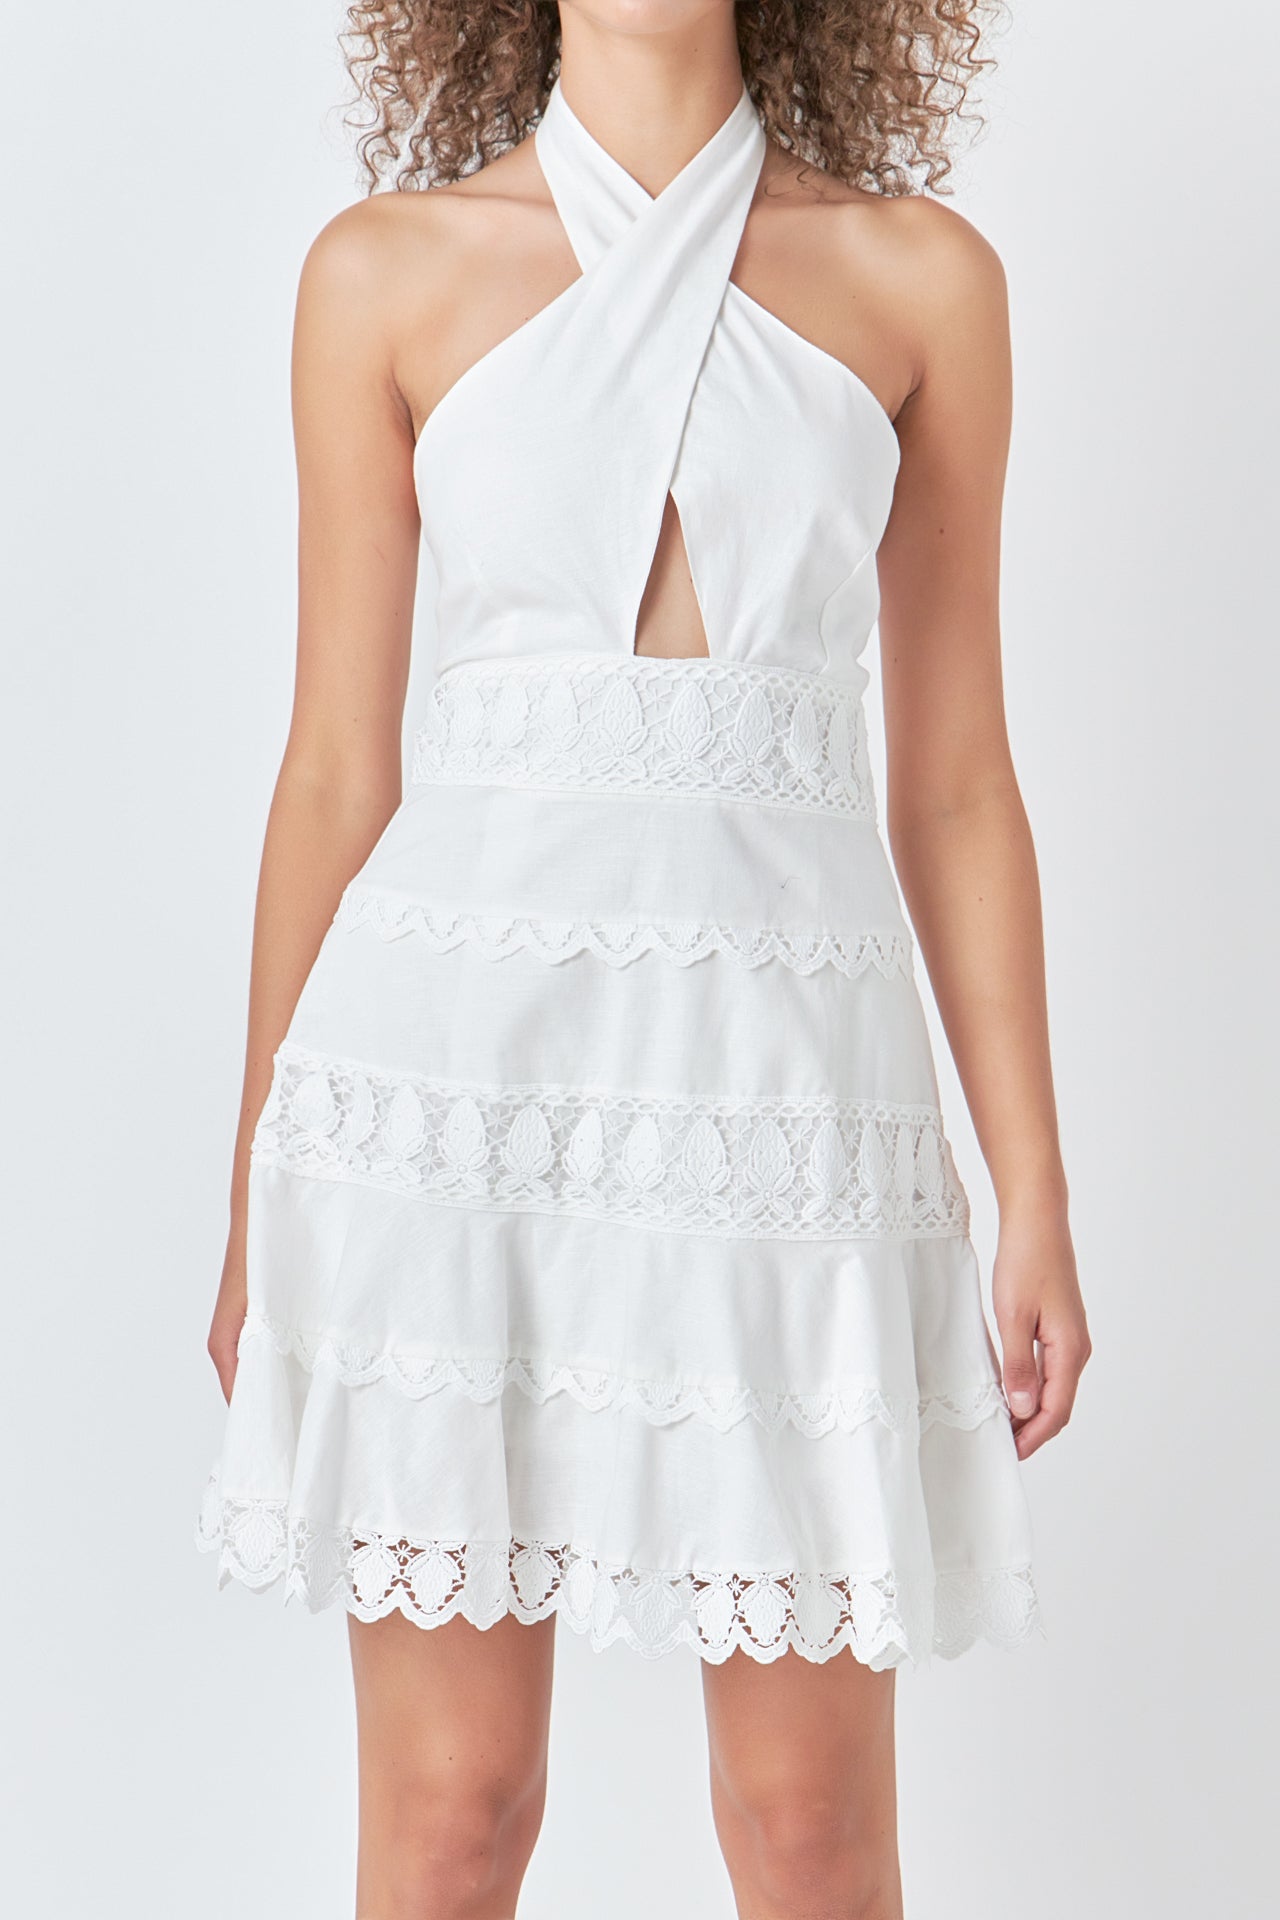 Endless Rose - Halter Neck Lace Trim Dress - Dresses in Women's Clothing available at endlessrose.com